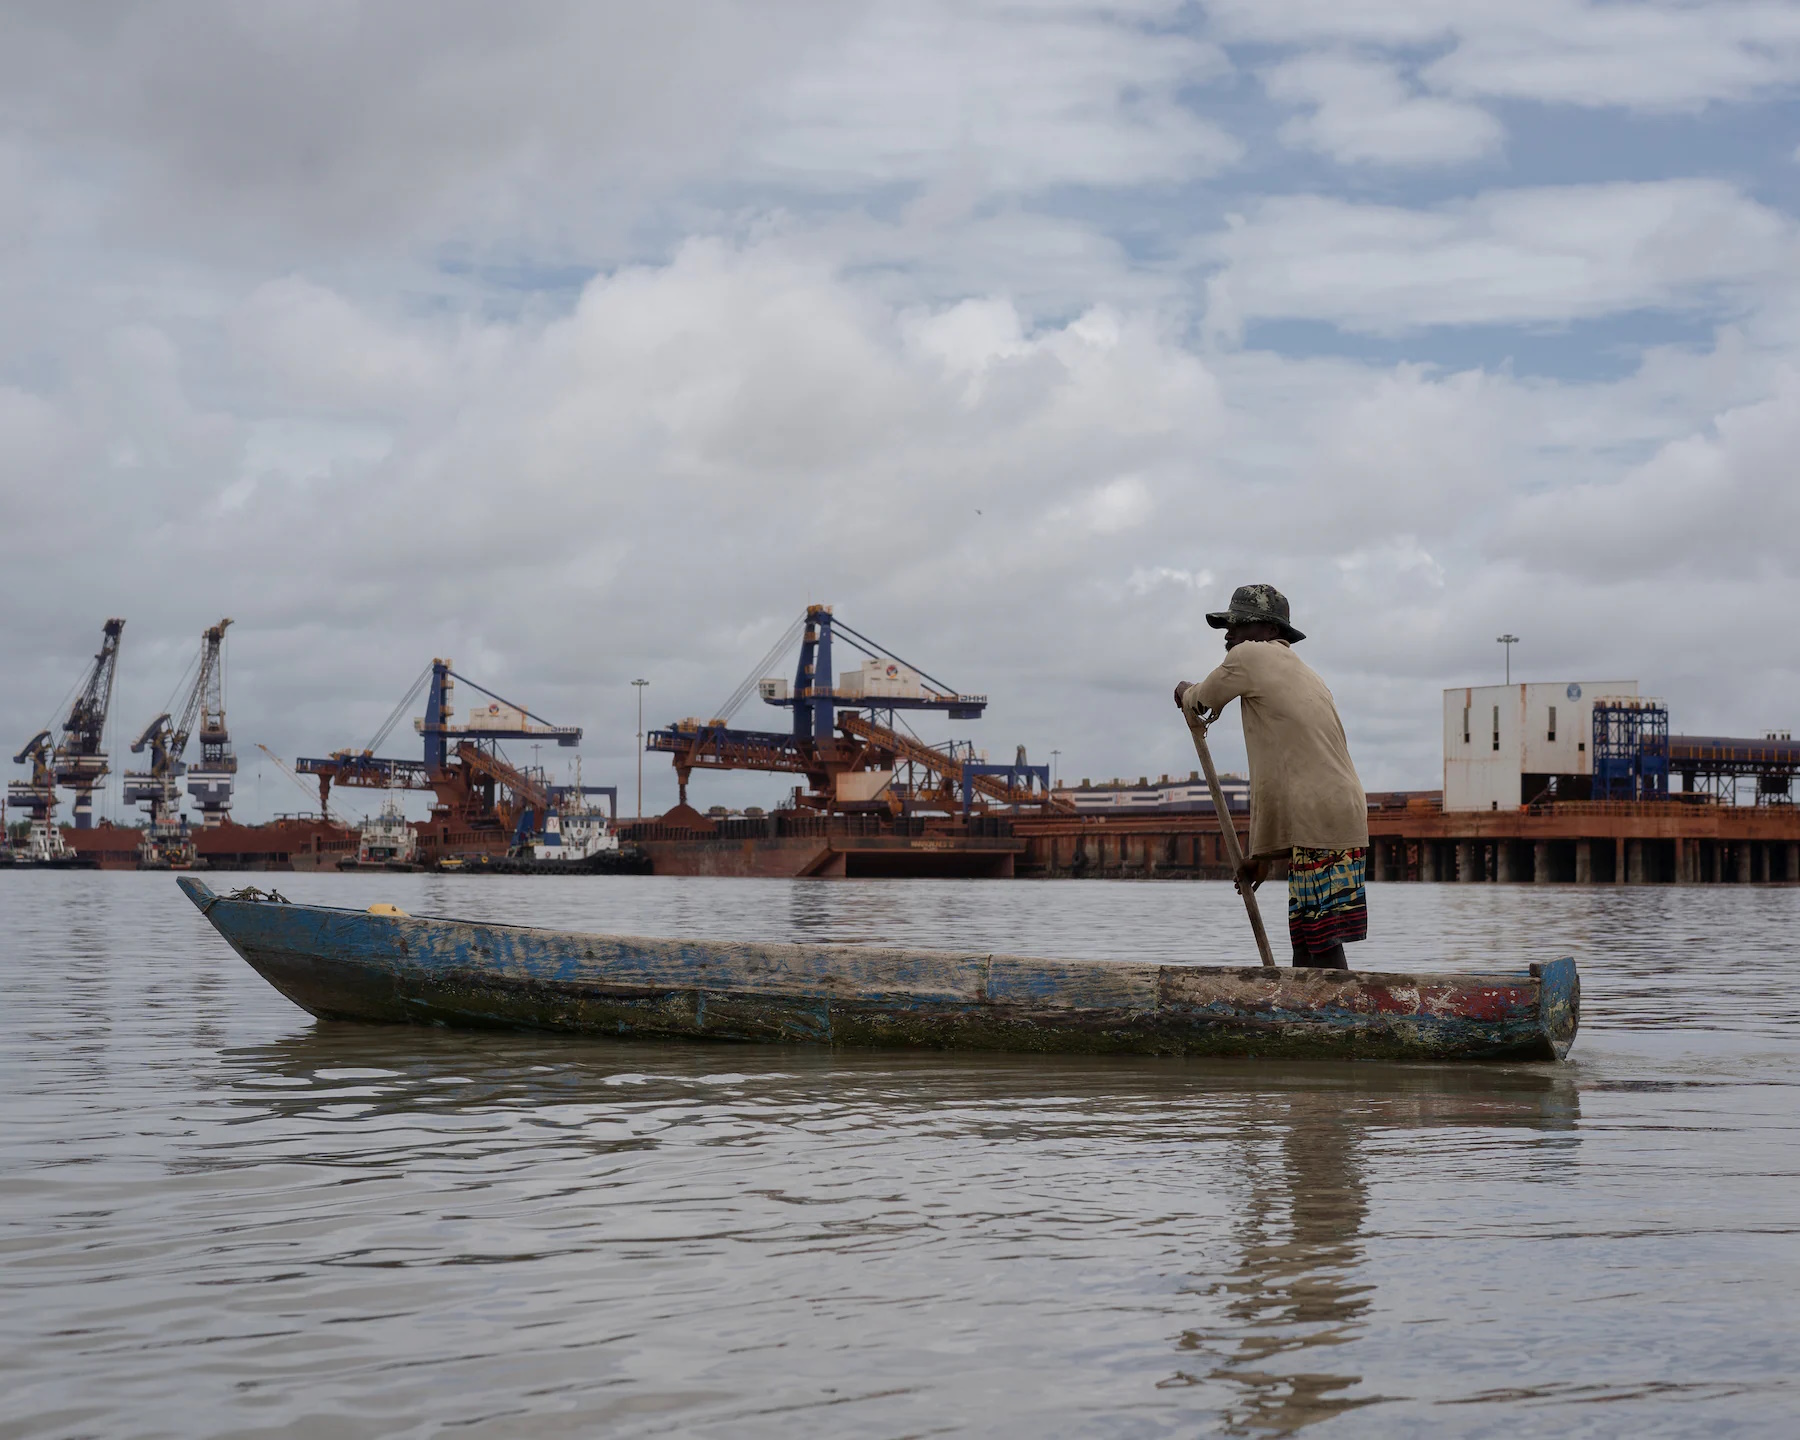 A fisherman passes near a mining port in Guinea. The presence of the port and container ships has considerably reduced the quantity of fish. Fisherman Aboubacar Camara says that his daily catch has greatly decreased and that SMB's security patrol speedboats routinely slash fishermen's nets as they pass by. Photo: Chloe Sharrock / MYOP / The Washington Post